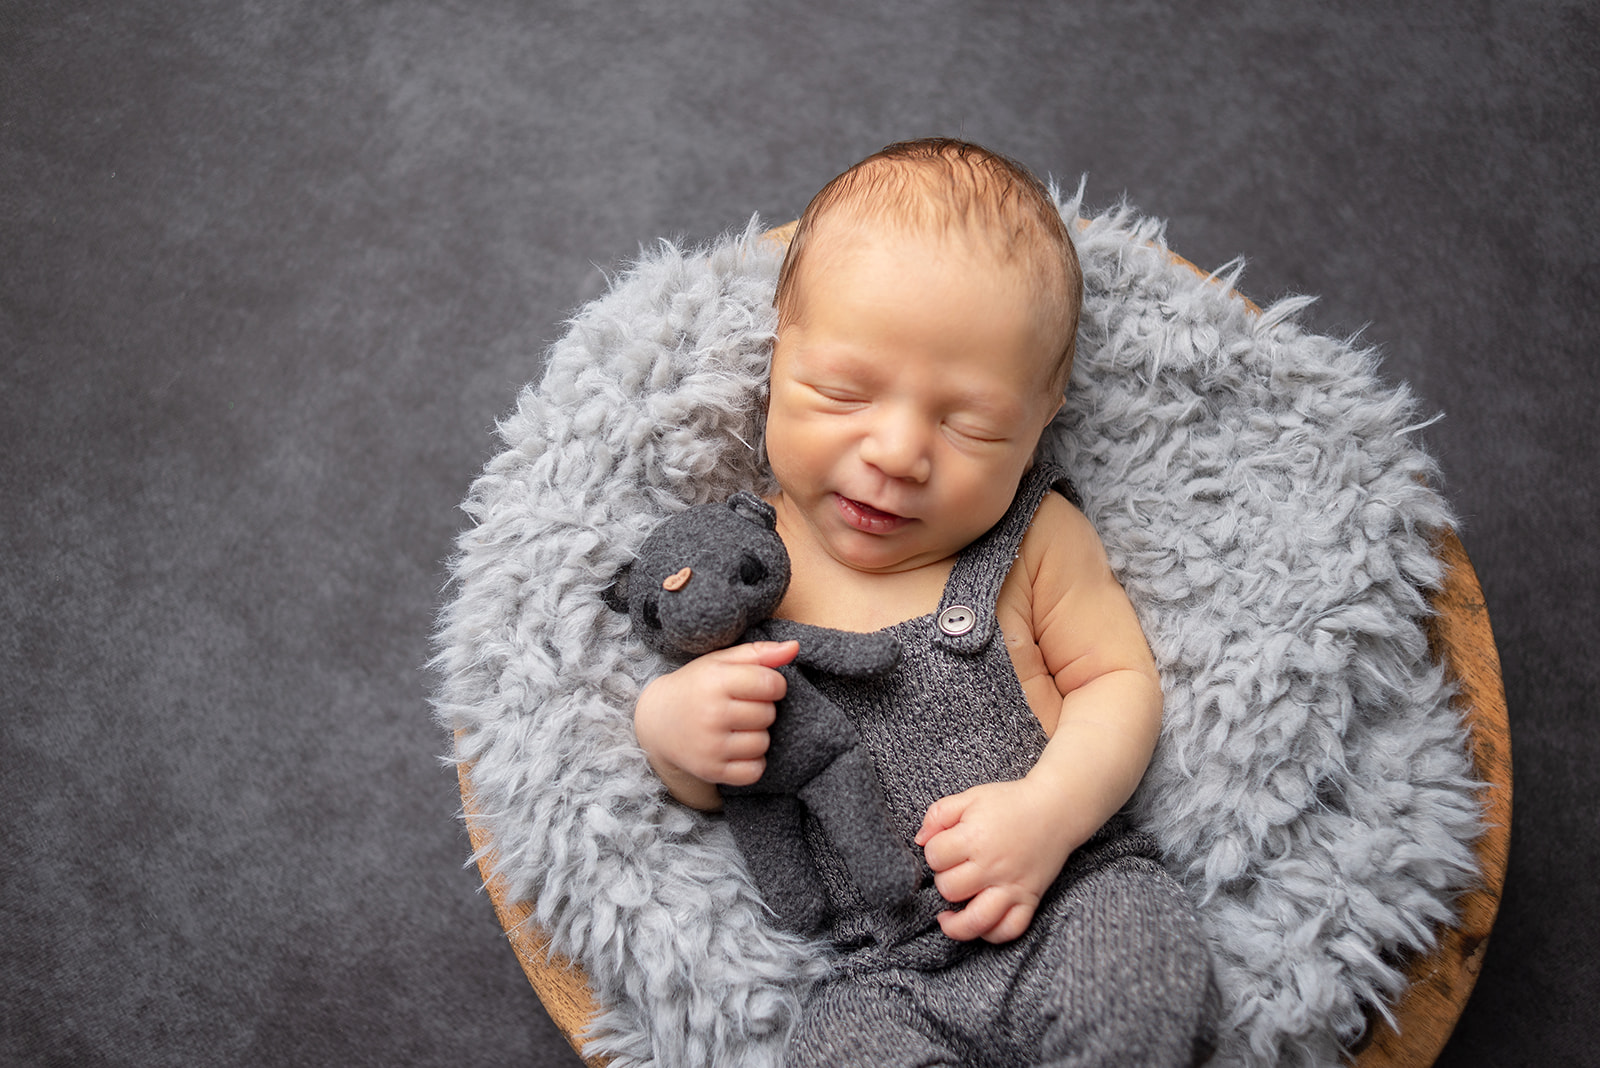 A baby boy sleeping on a gray fuzzy blanket placed inside a wooden bowl in Celesta Champagne Photography studio